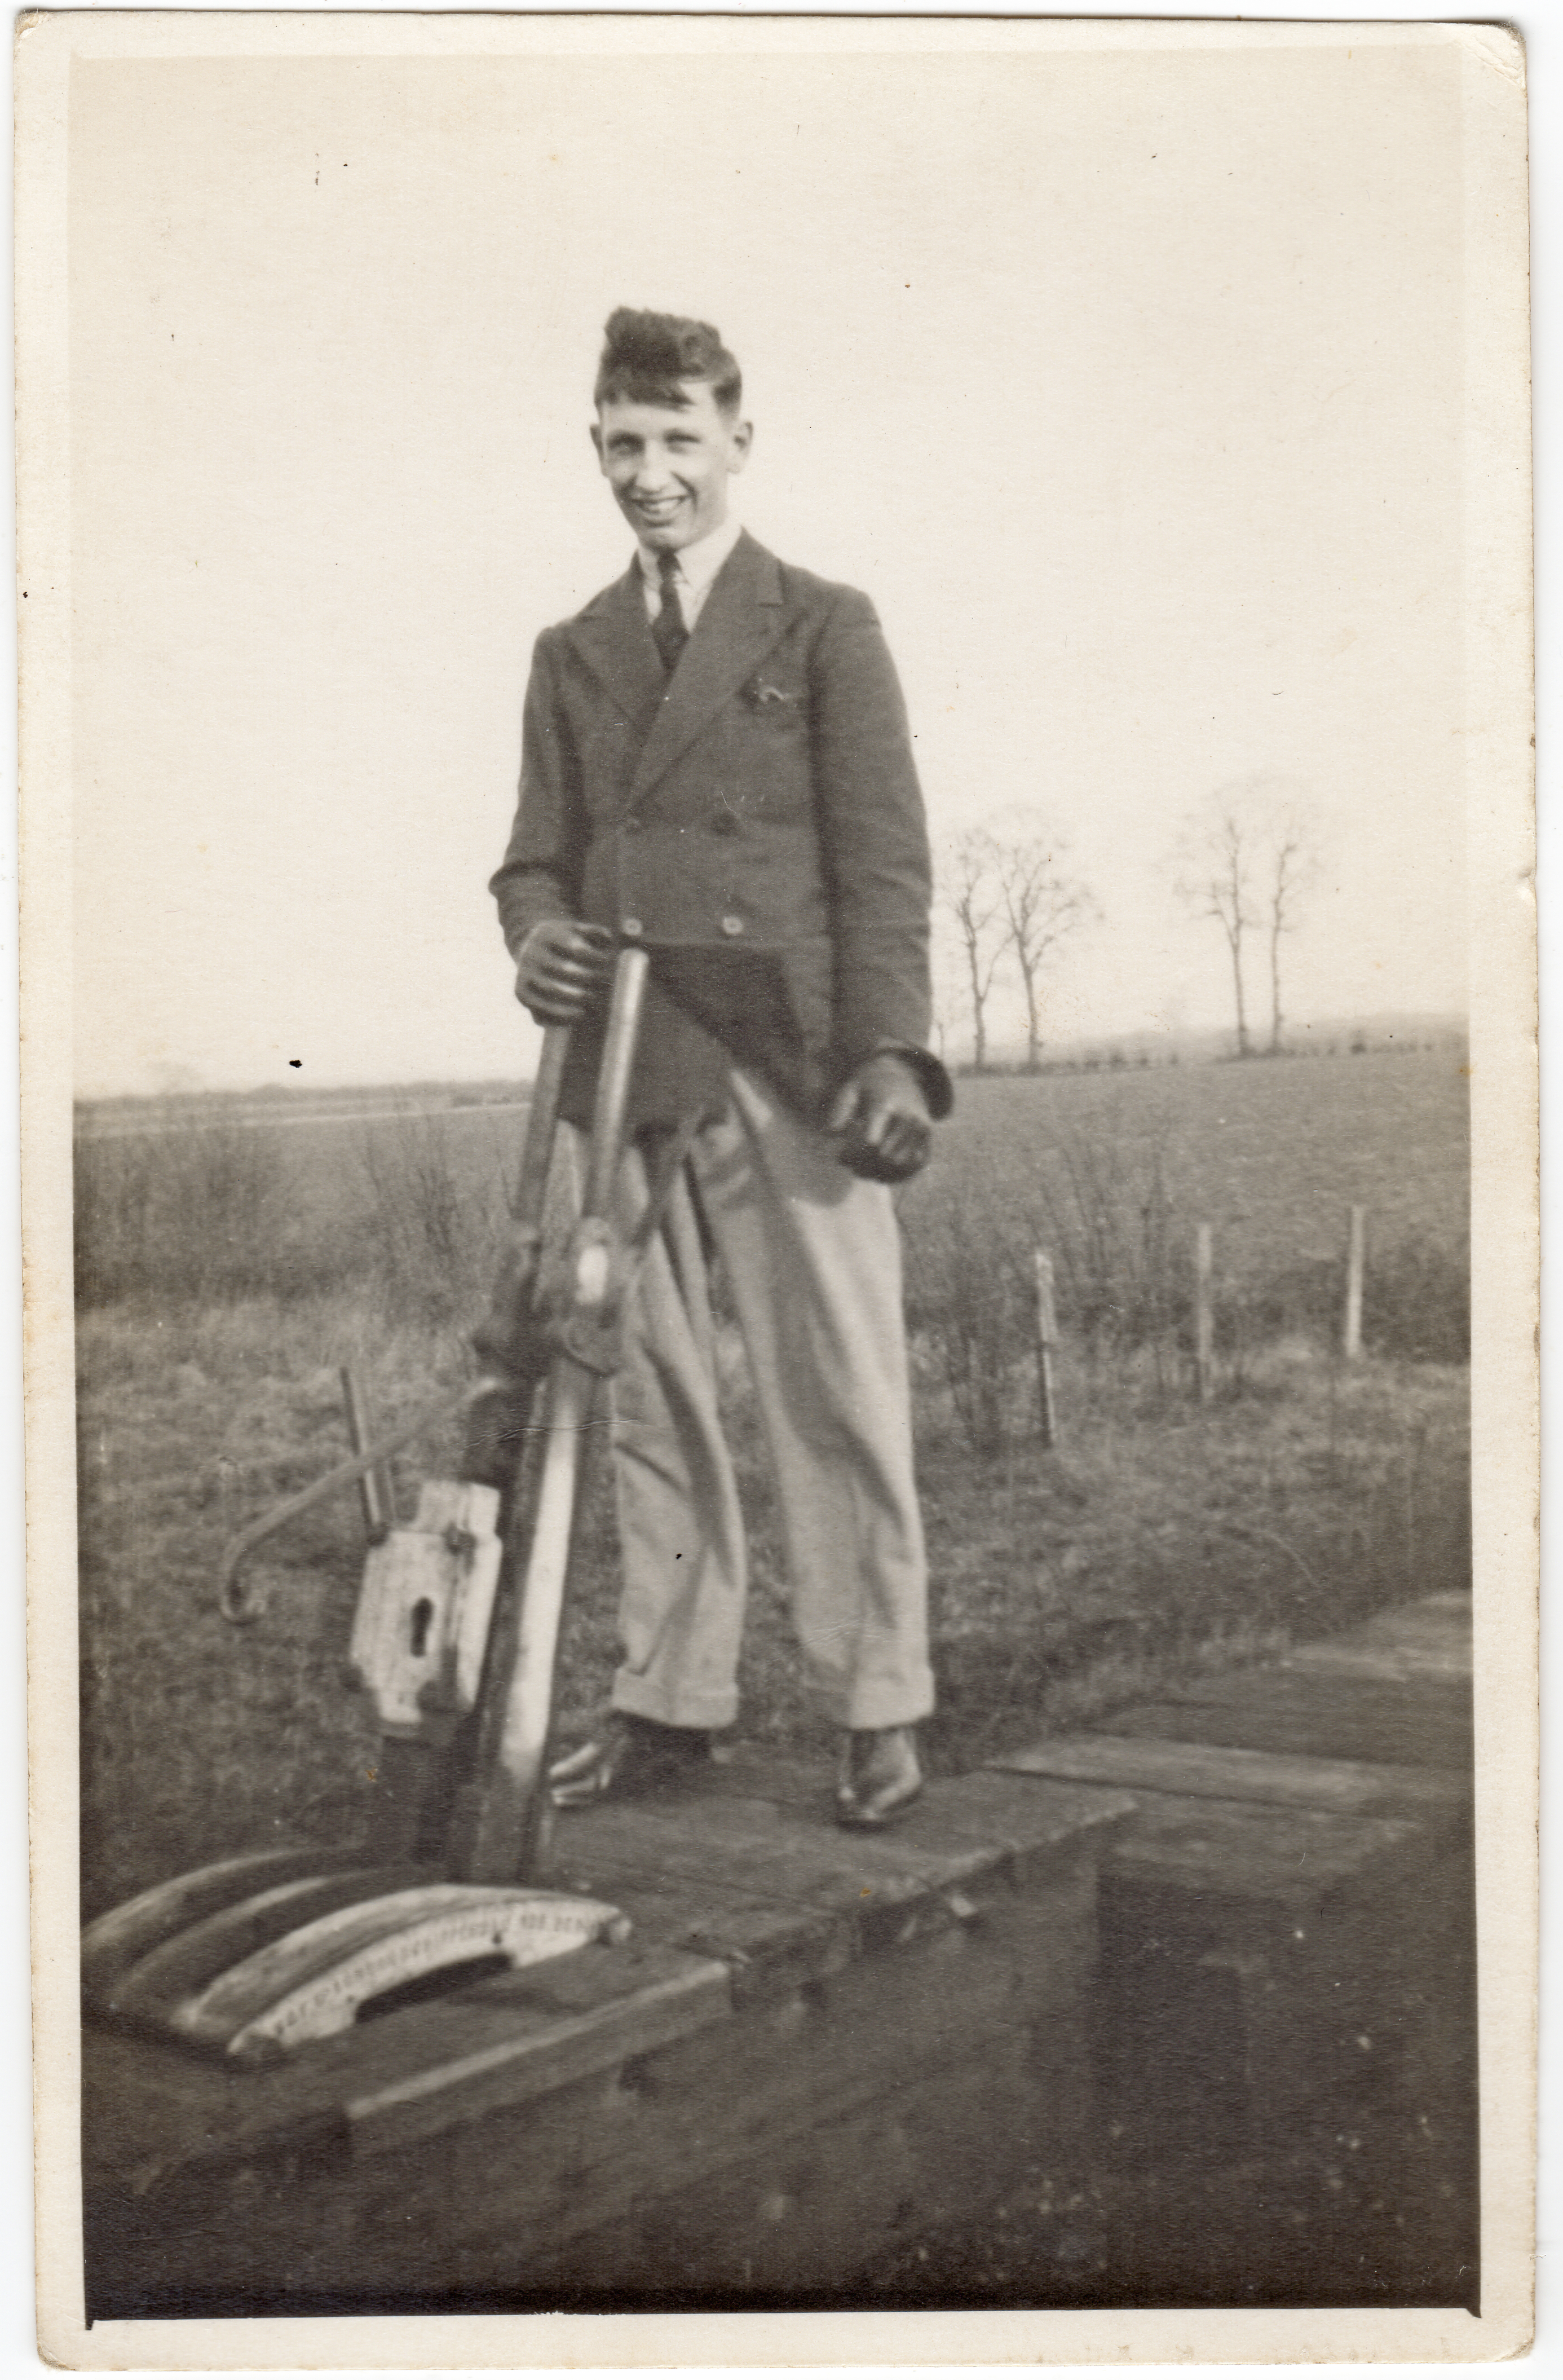 128. ID OJR_273 Edgar Reynolds working on the railway ? Photograph donated by Pat Milgate
Cat1 Places-->Peldon-->People